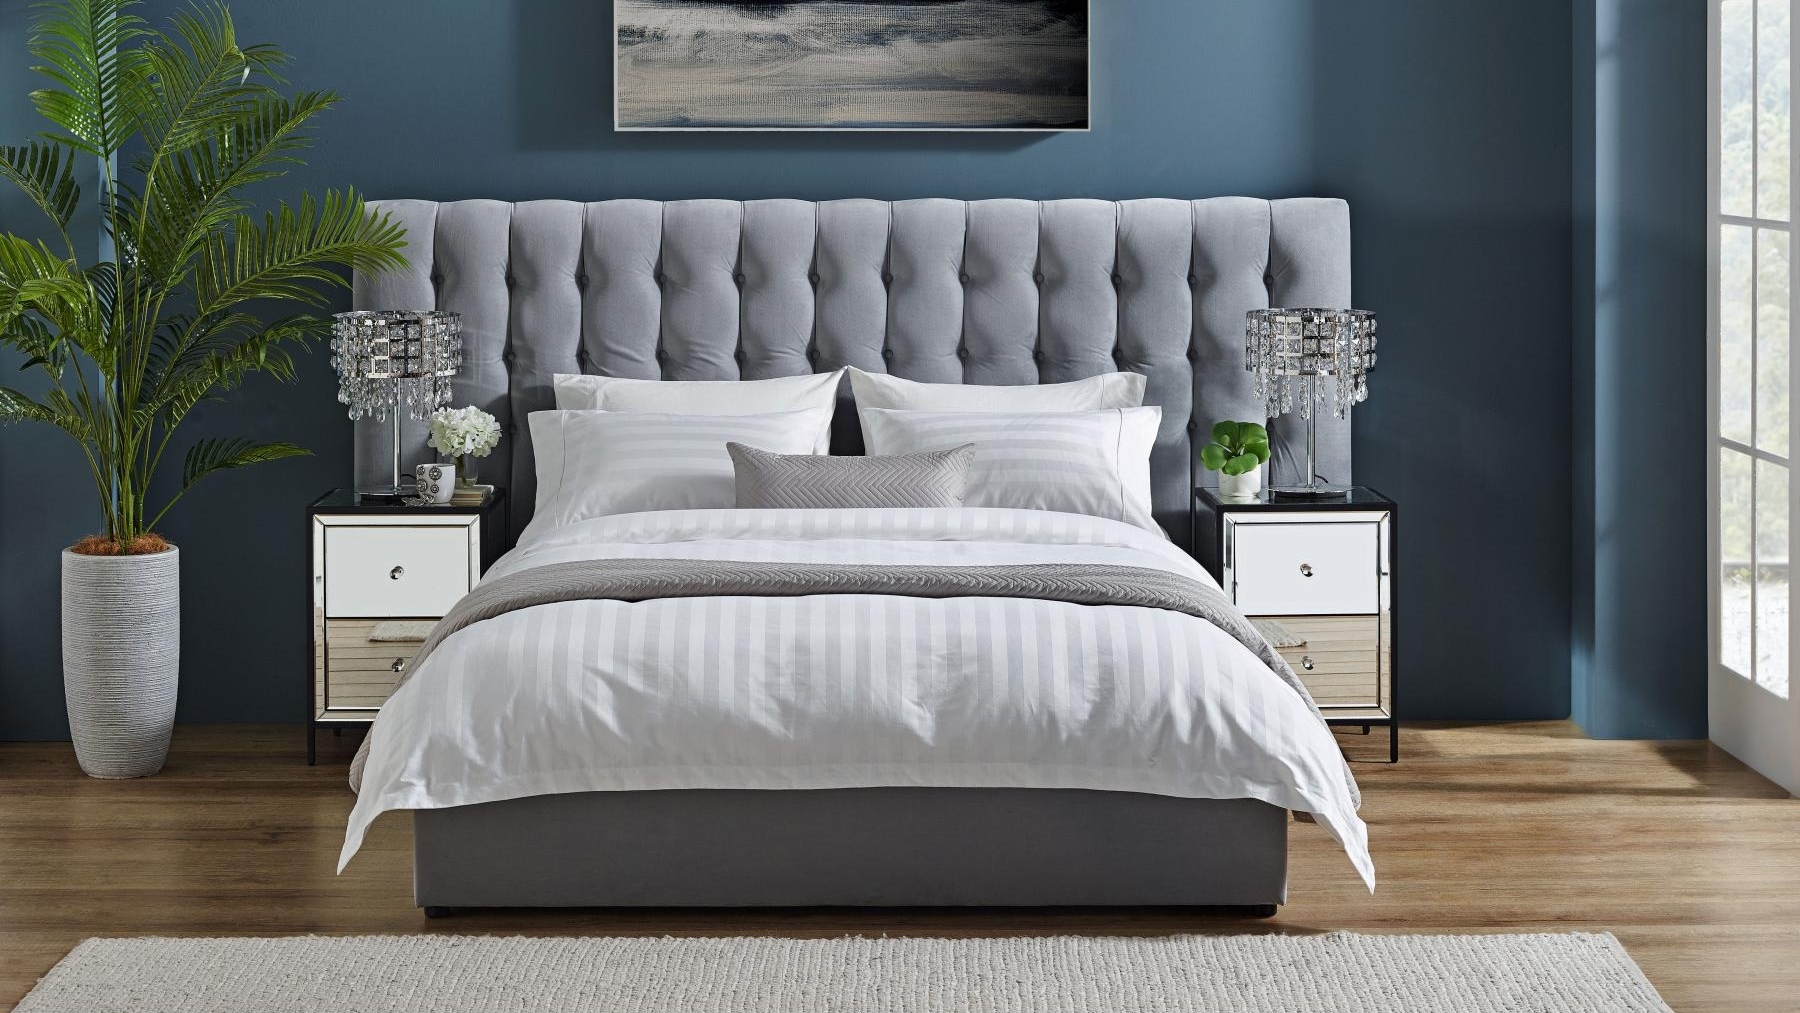 Heather Bed With Extended Bedhead, Extended King Size Bed